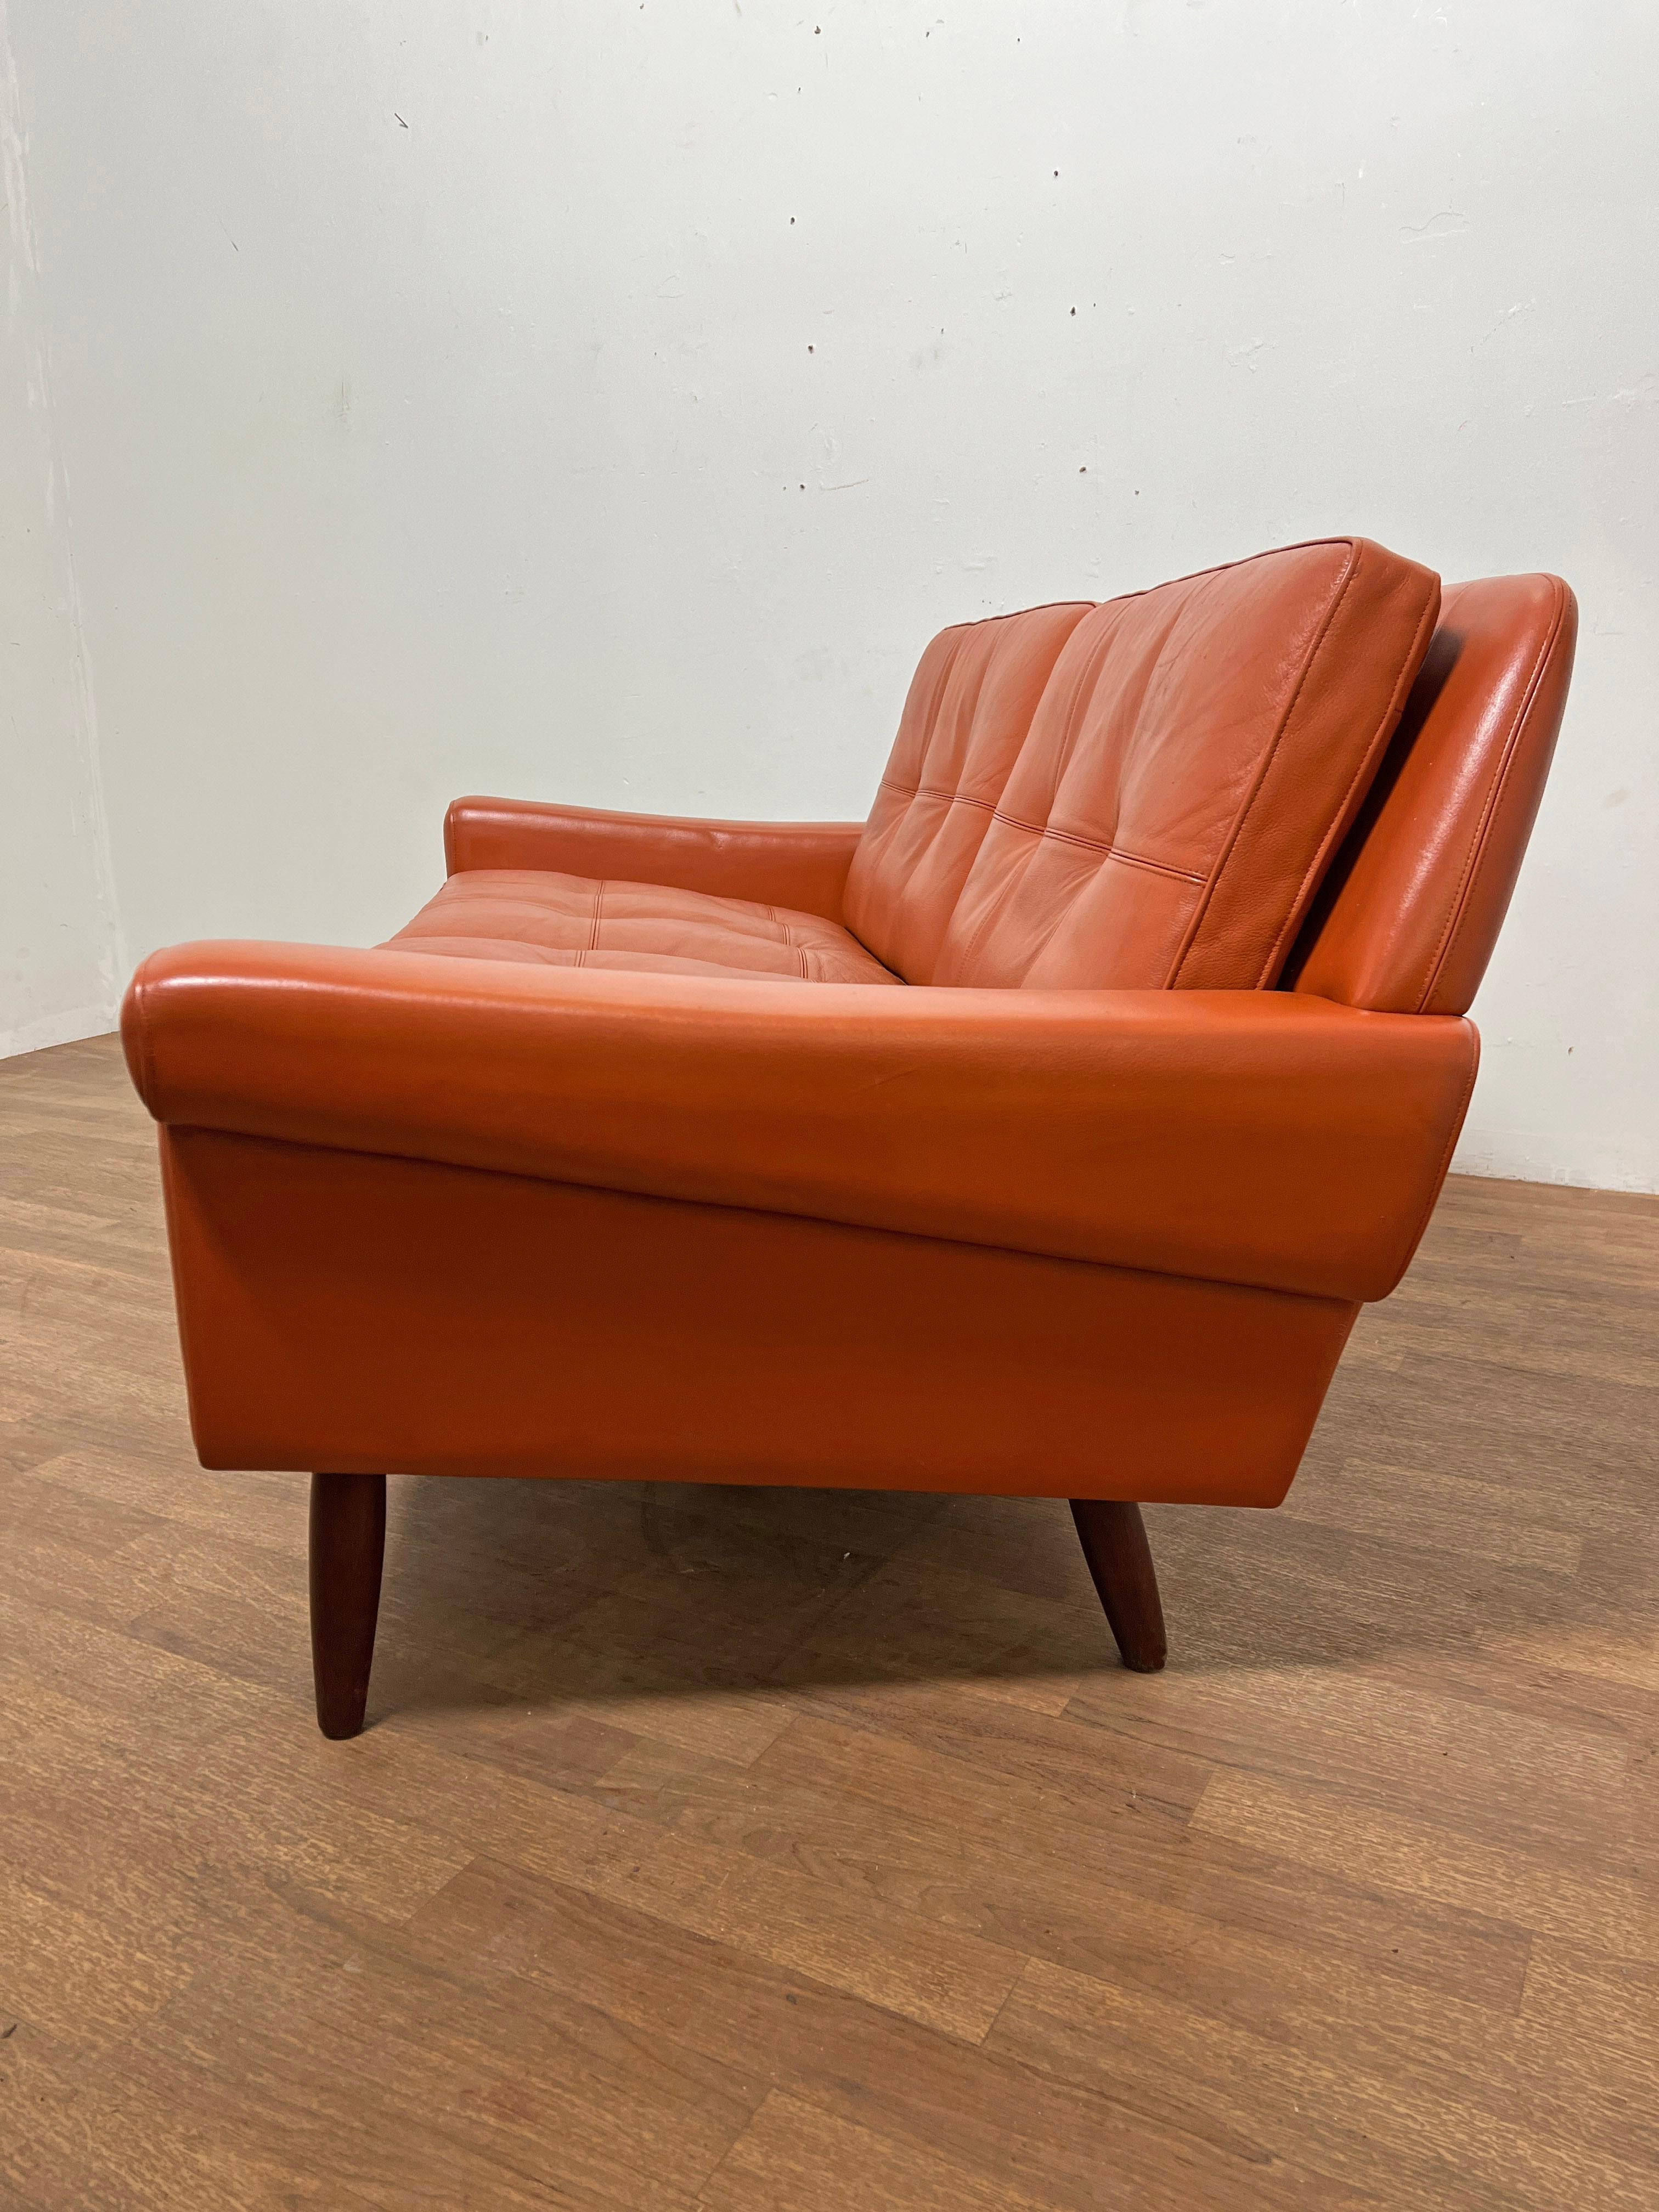 A 1960s loveseat in original cordovan leather and teak legs by Svend Skipper Mobelfabrik, Denmark.  A matching pair of lounge chairs are available in a separate listing.